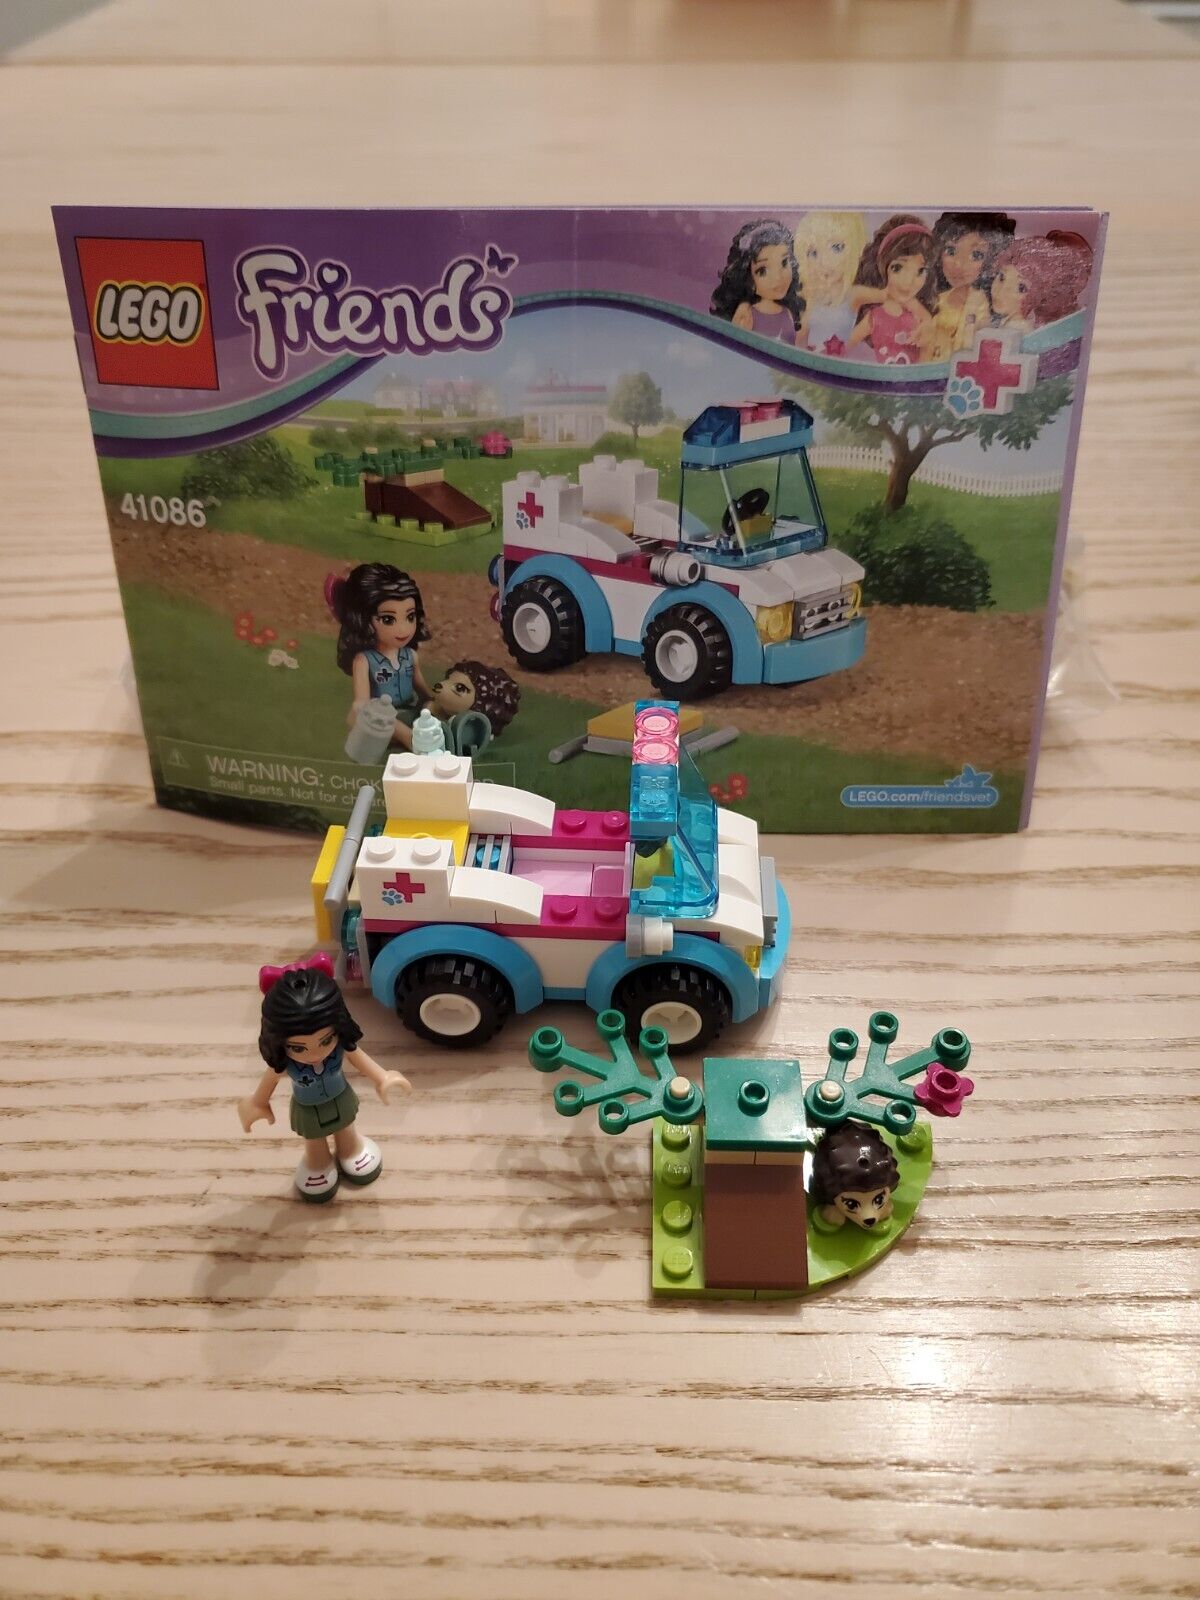 Lego Friends 41086 Emma Vet Ambulance Complete With Book And Minifigures. 